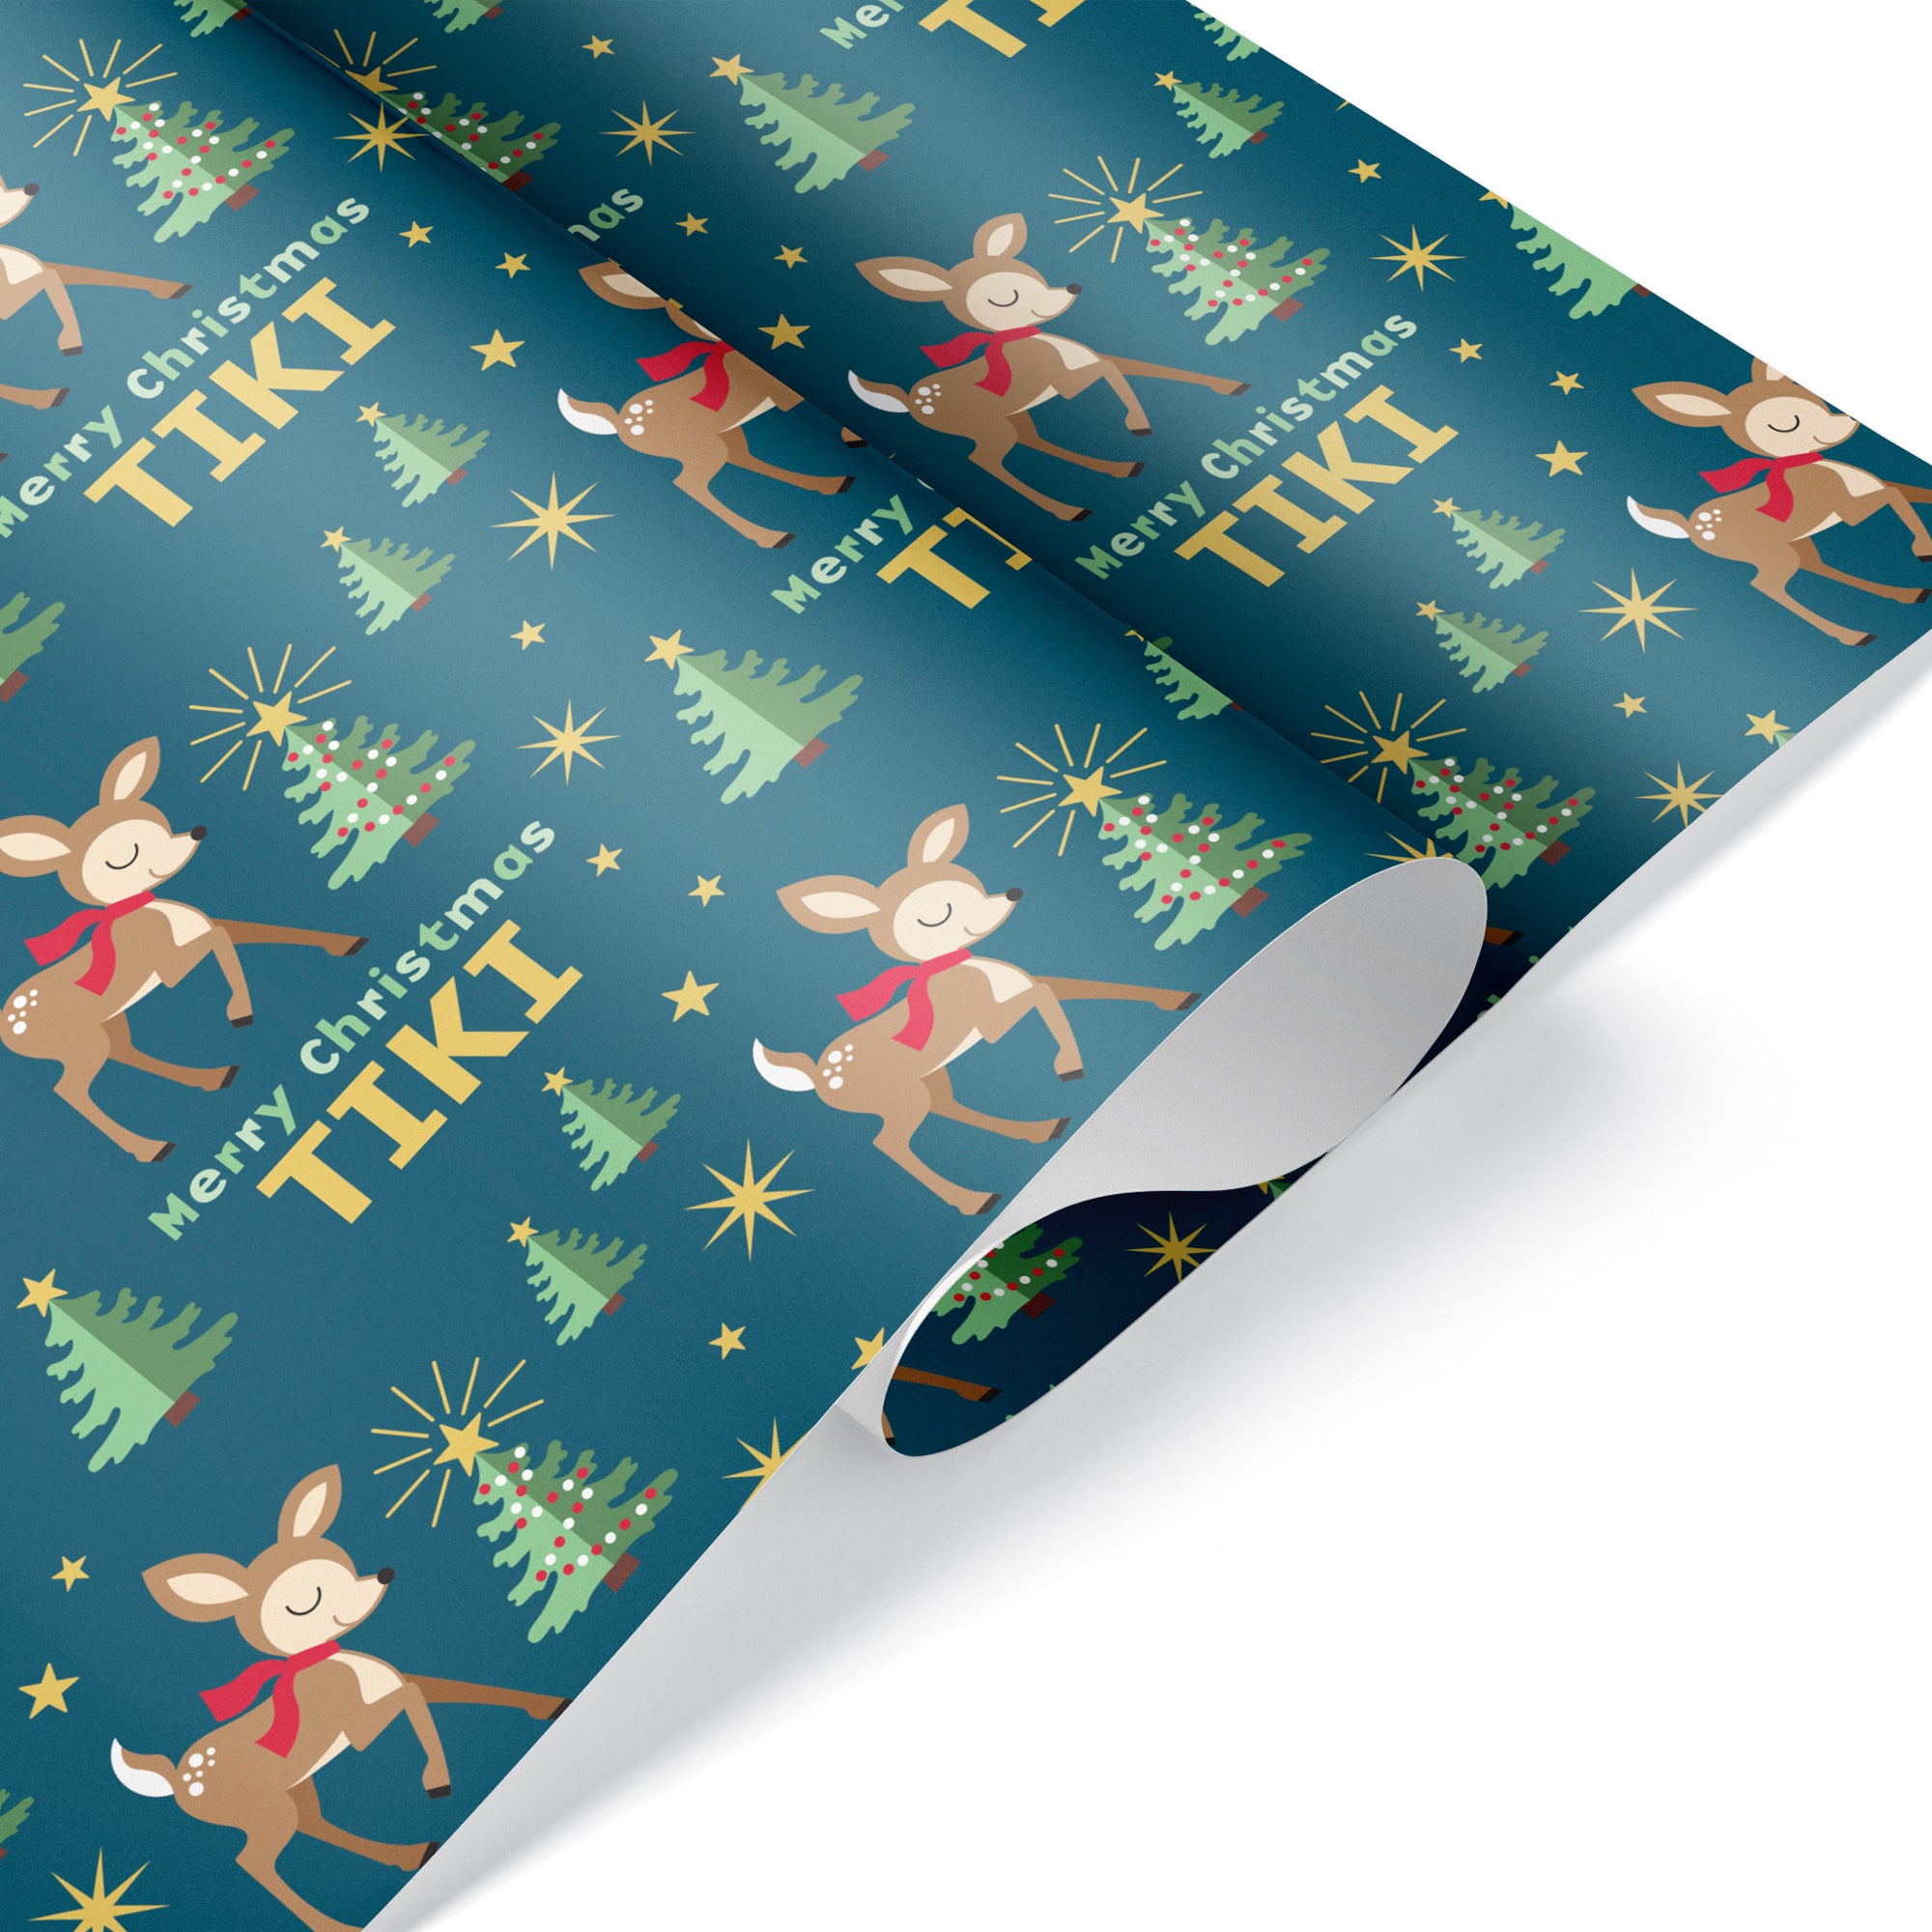 Christmas Personalized Name Wrapping Paper - CLASSIC